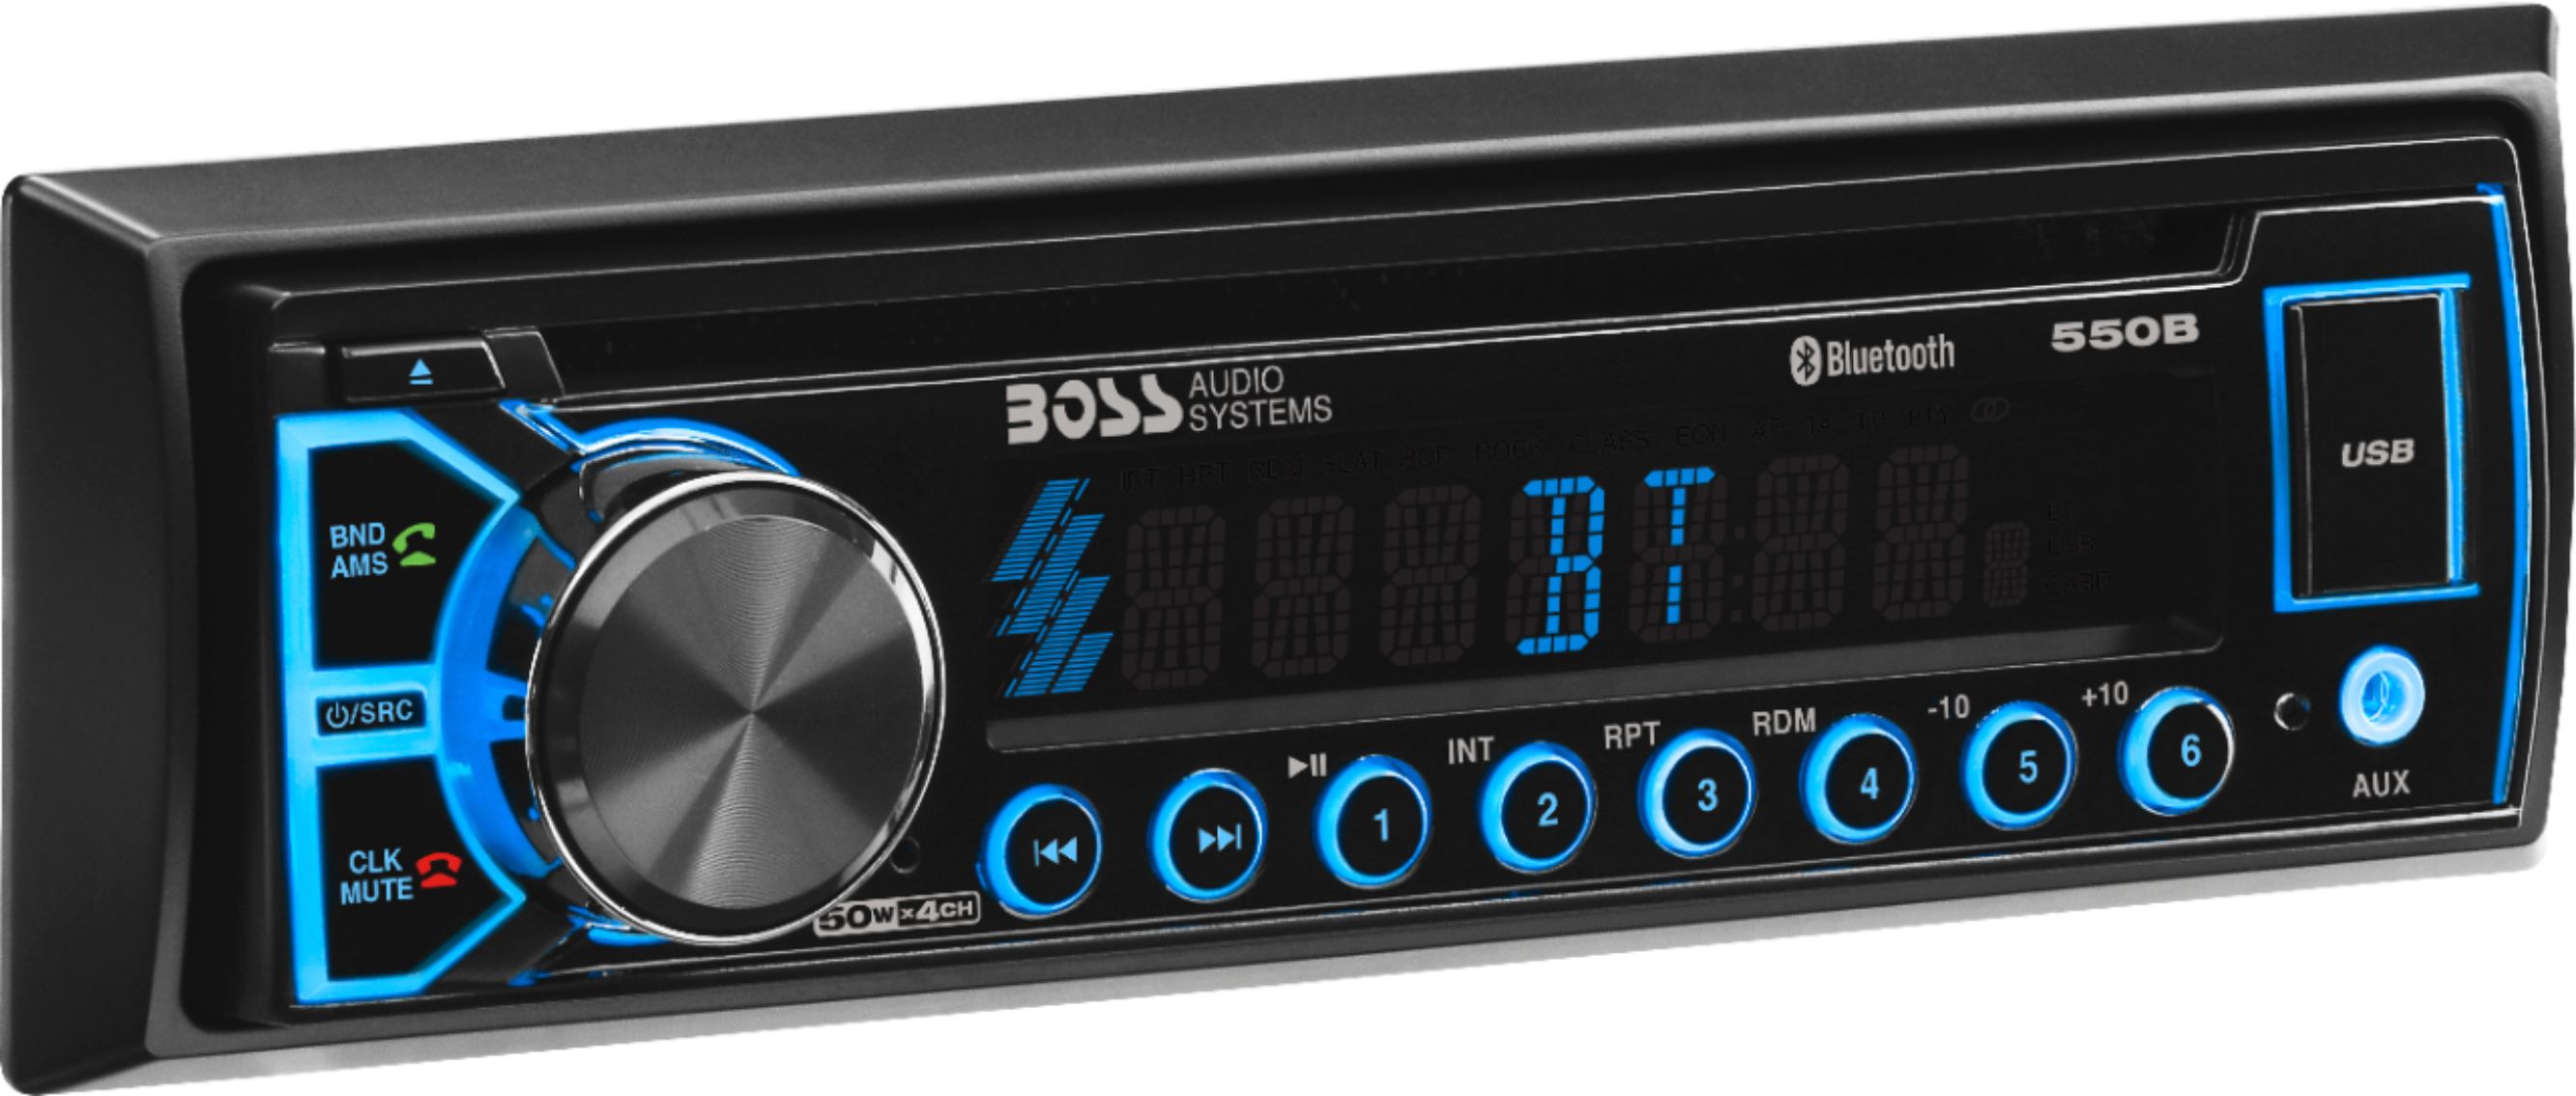 Angle View: BOSS Audio - Built-in Bluetooth - In-Dash CD/DM Receiver - Black